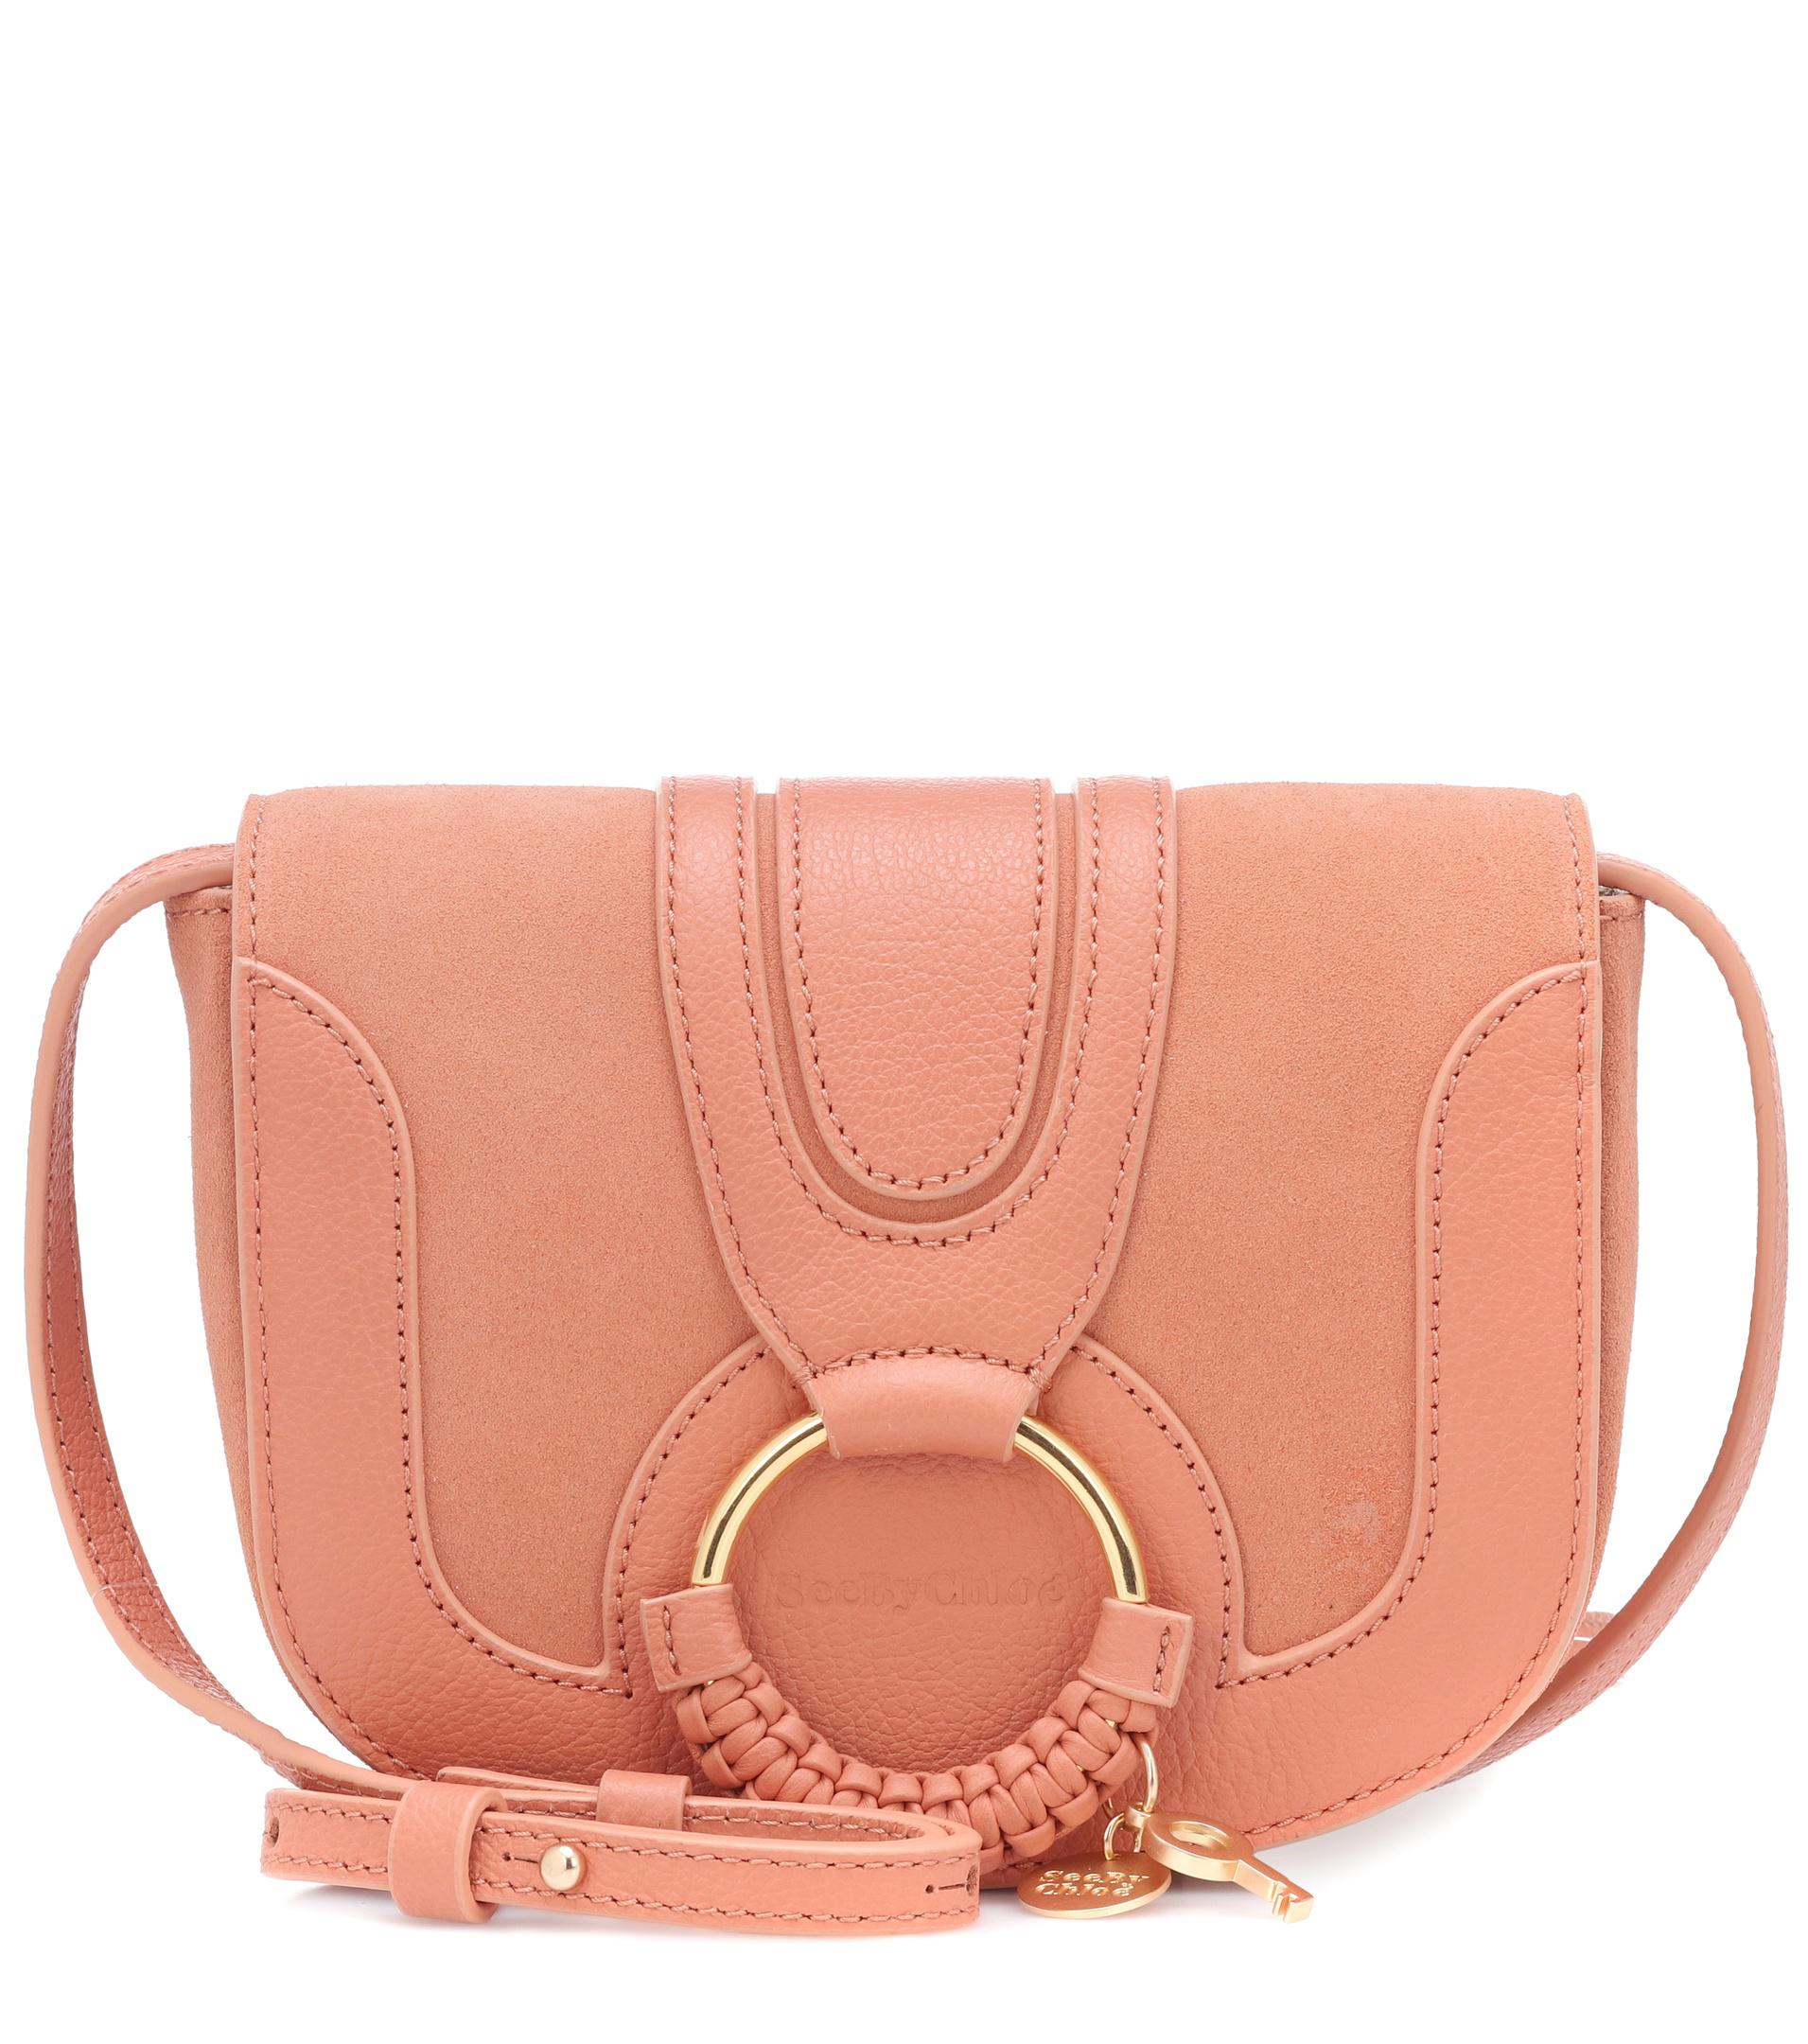 See By Chloé Hana Mini Leather Shoulder Bag in Pink - Lyst